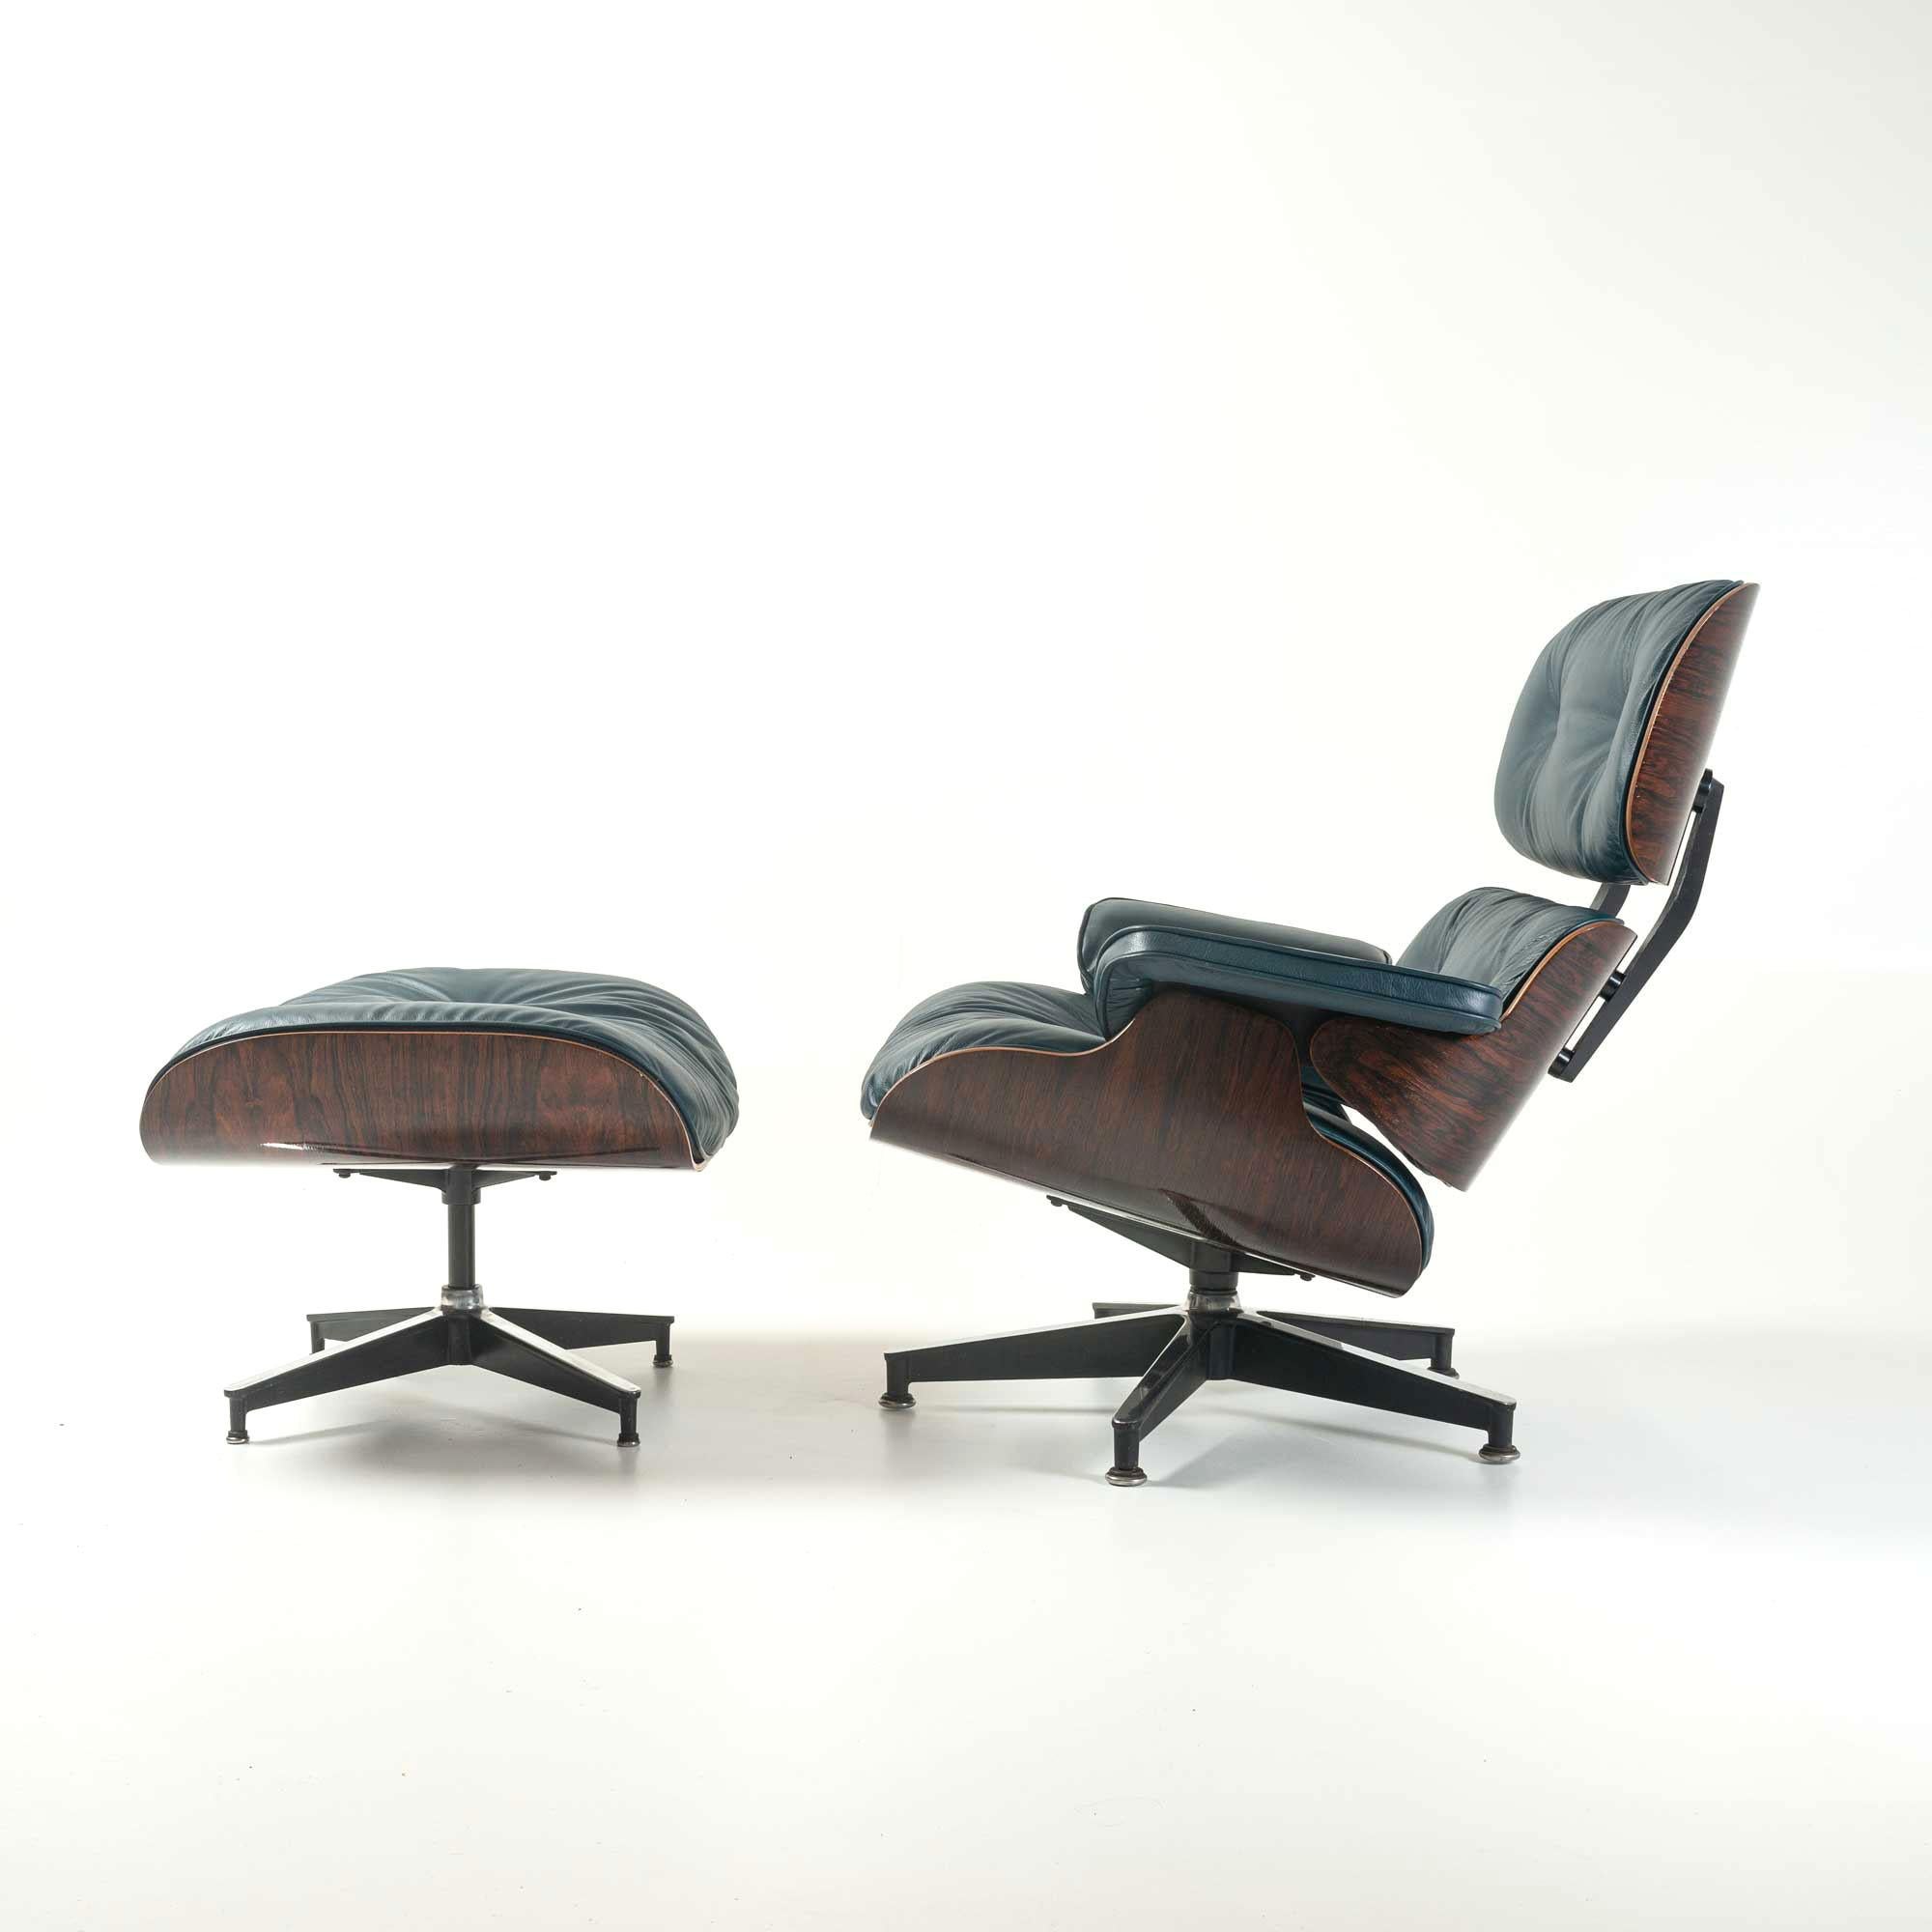 3rd Gen Eames lounge chair in rosewood shell frames with ottoman, re-upholstered in dark pine green leather, with new shock mounts, re-polished steel frame. 

